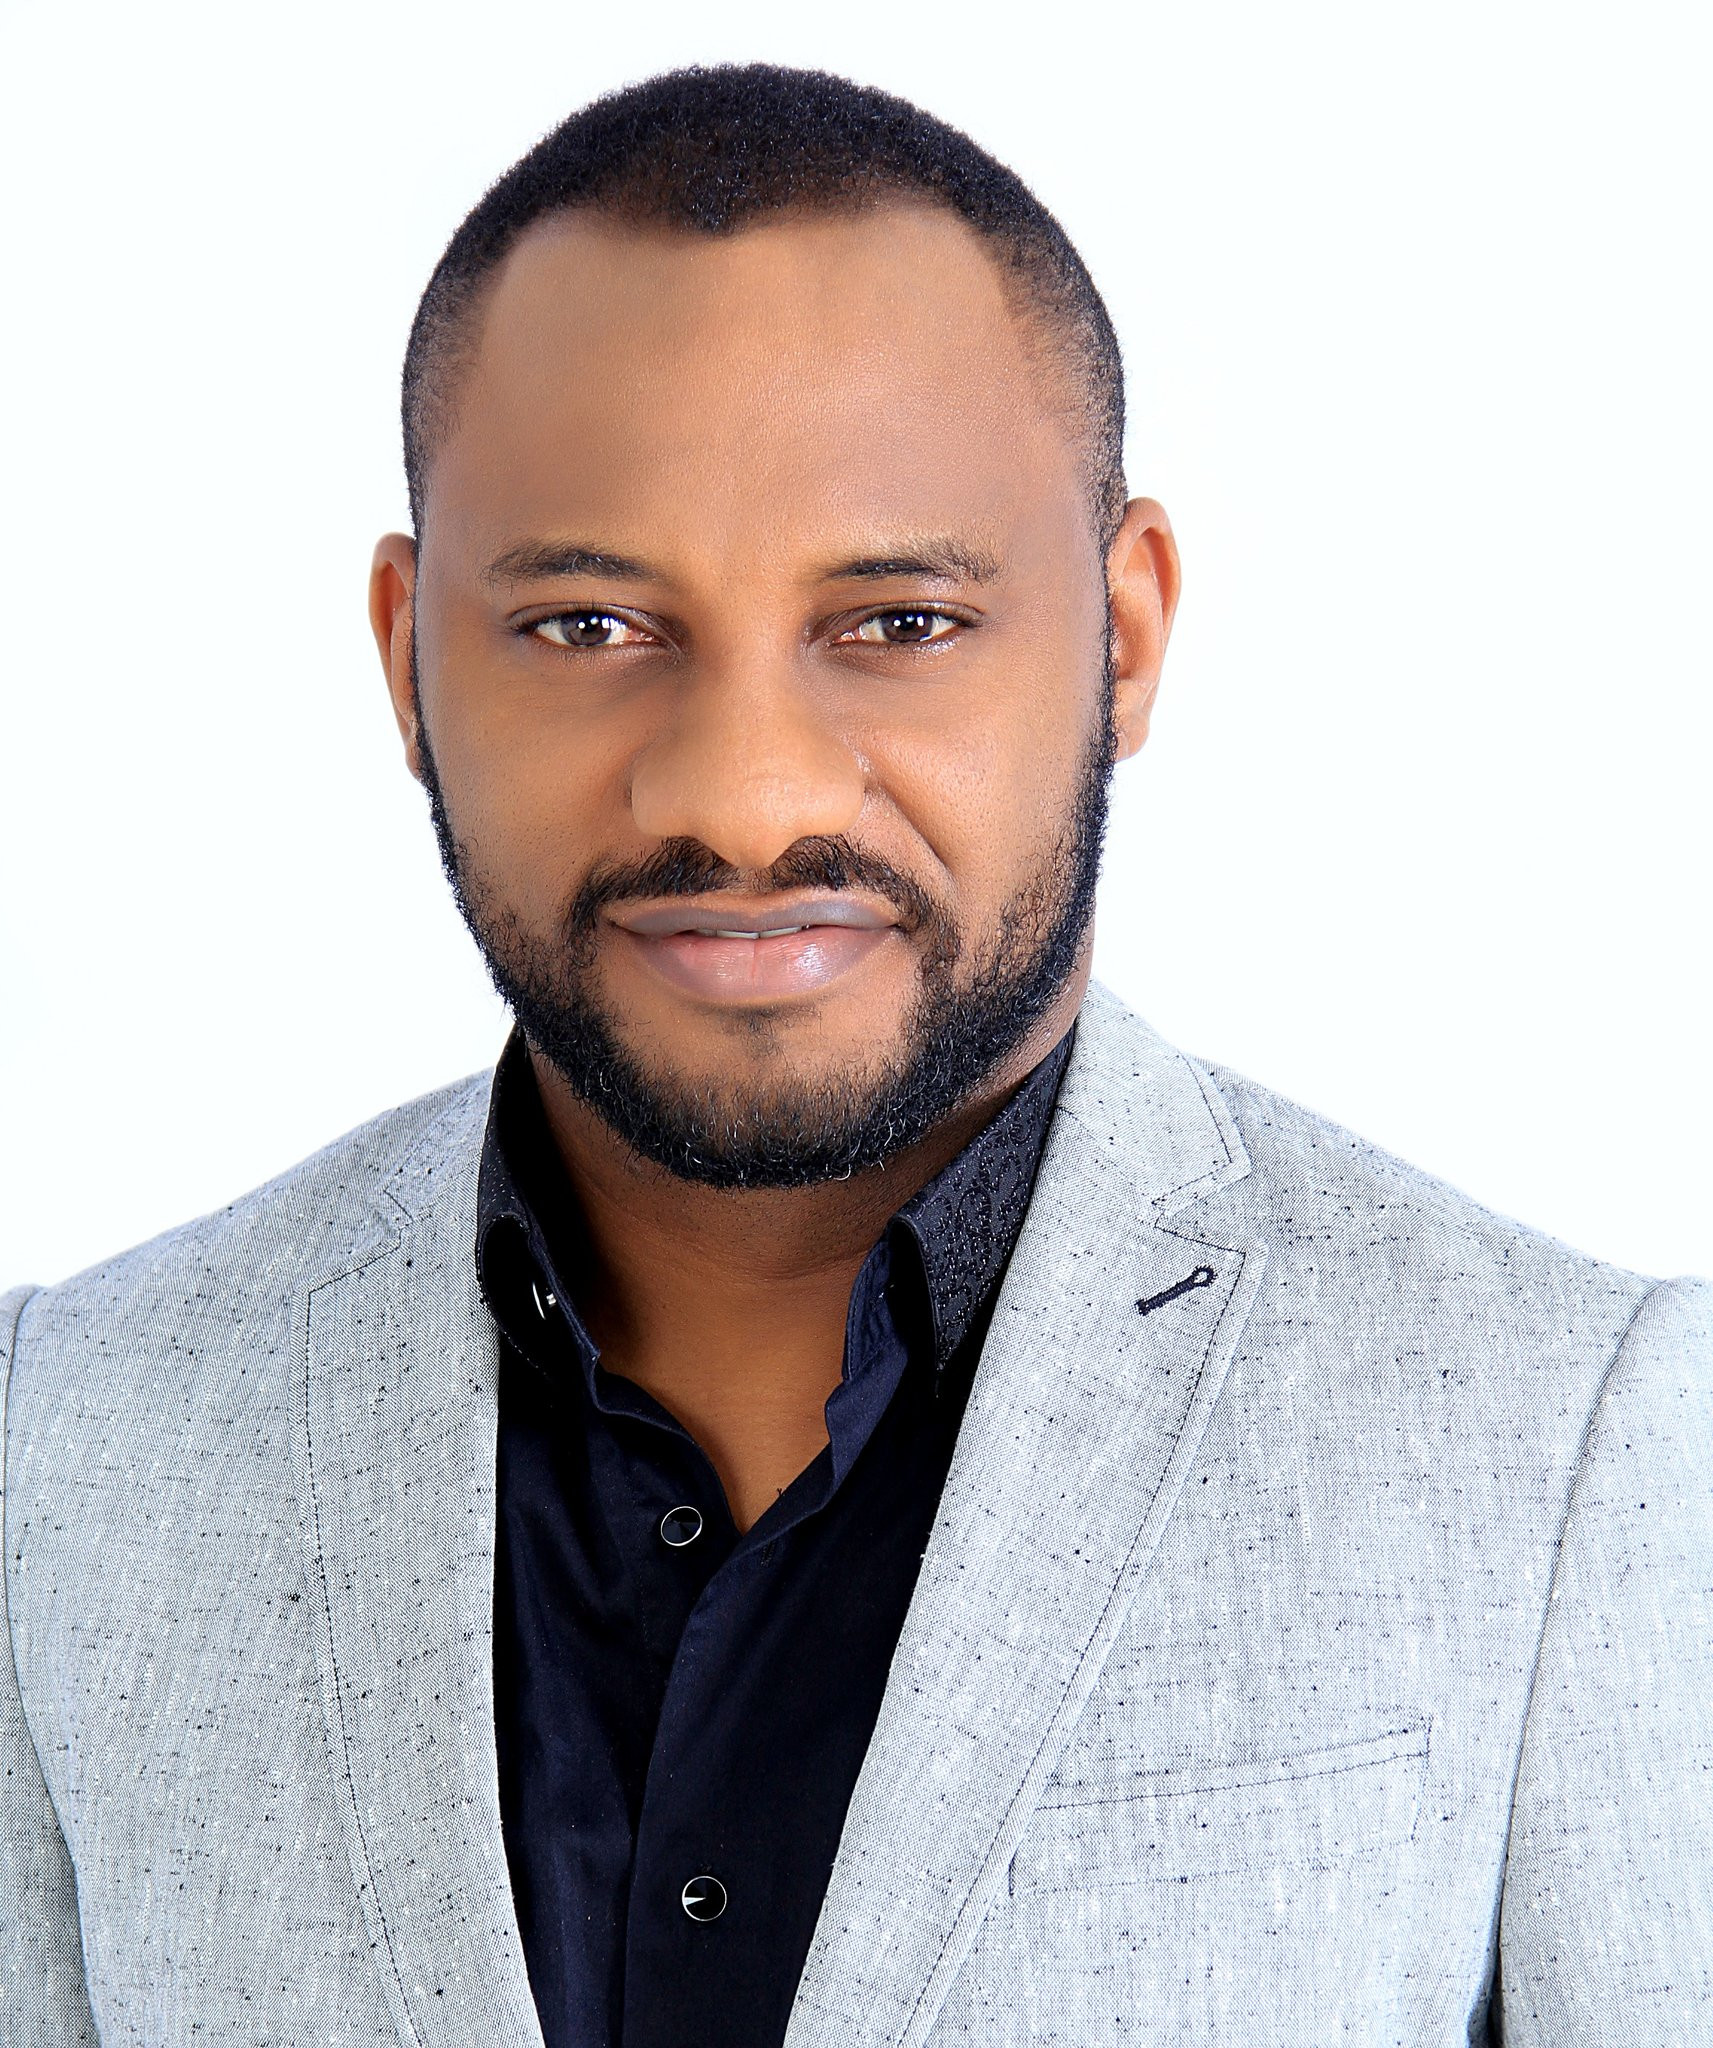 I will be the best President Nigeria has ever had - Actor Yul Edochie declares